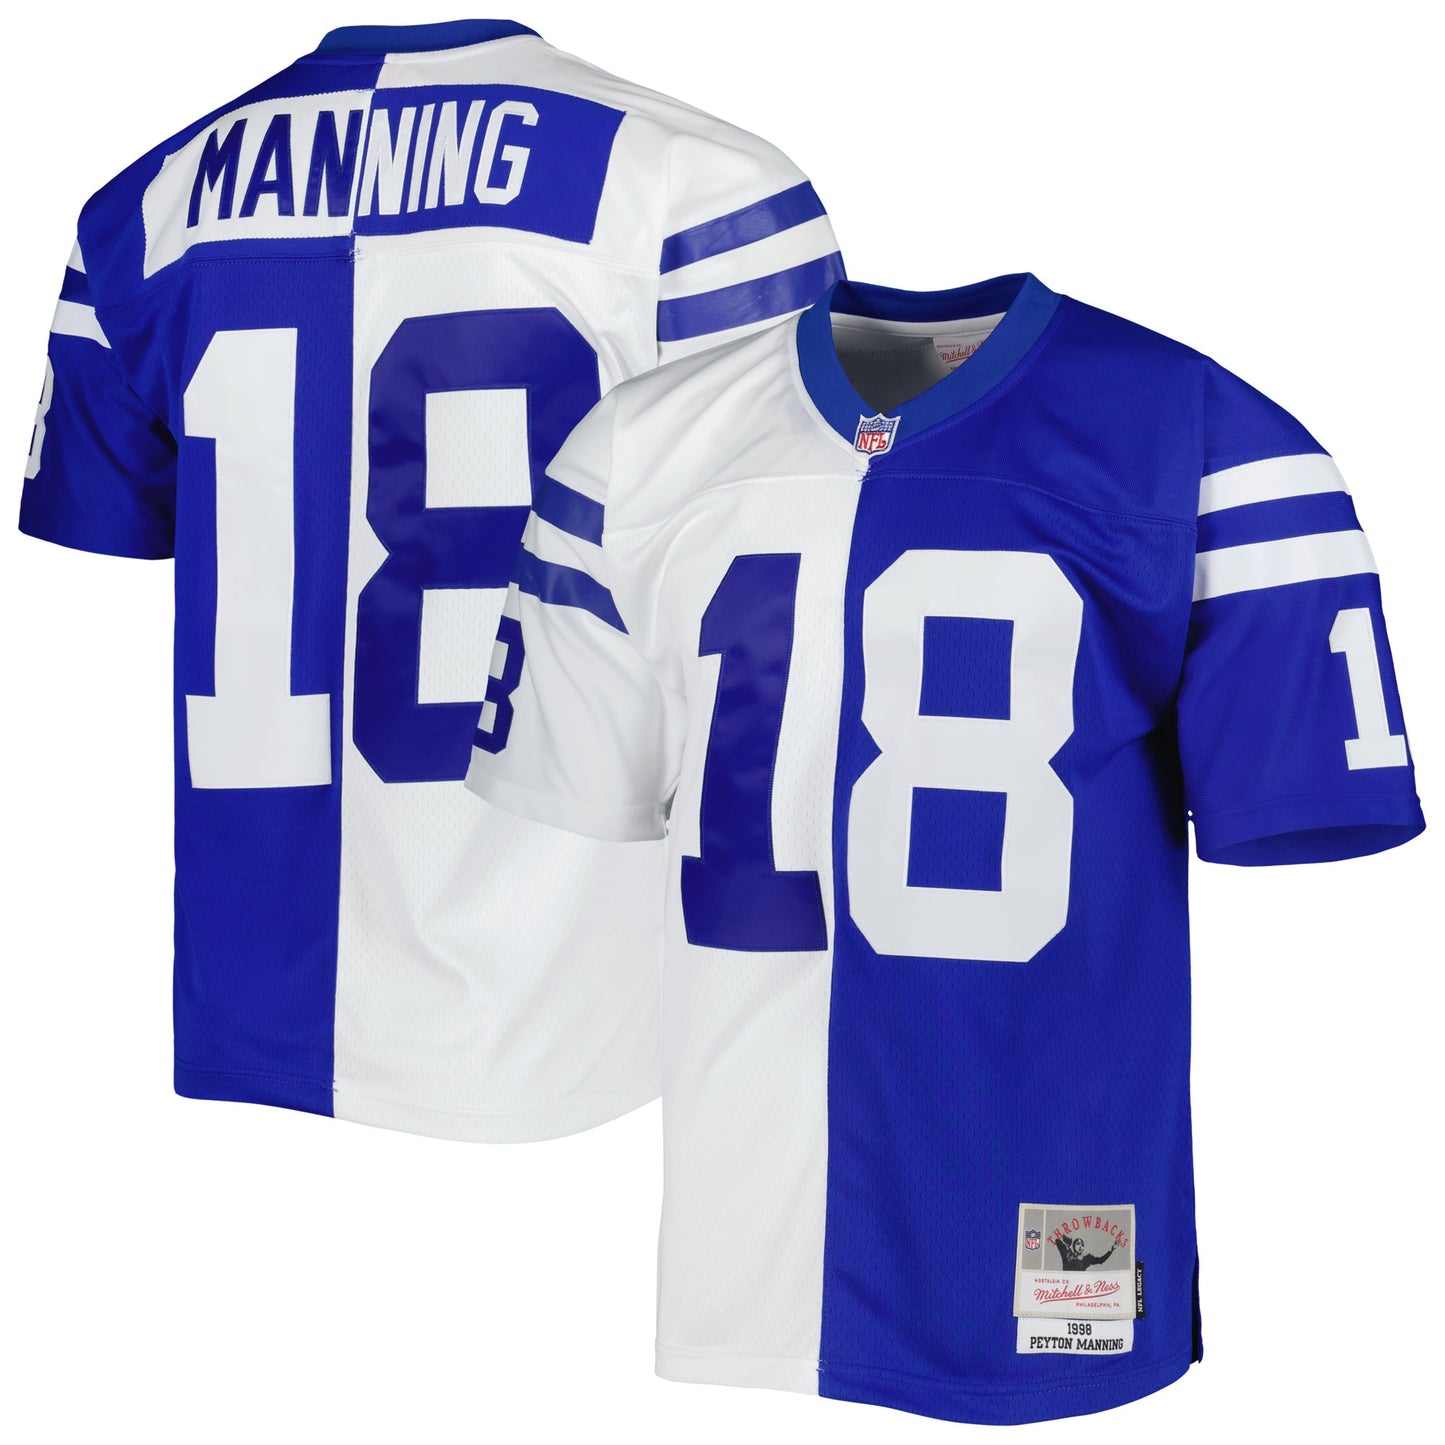 Peyton Manning Indianapolis Colts Mitchell & Ness 1998 Split Legacy Replica Jersey - Royal/White